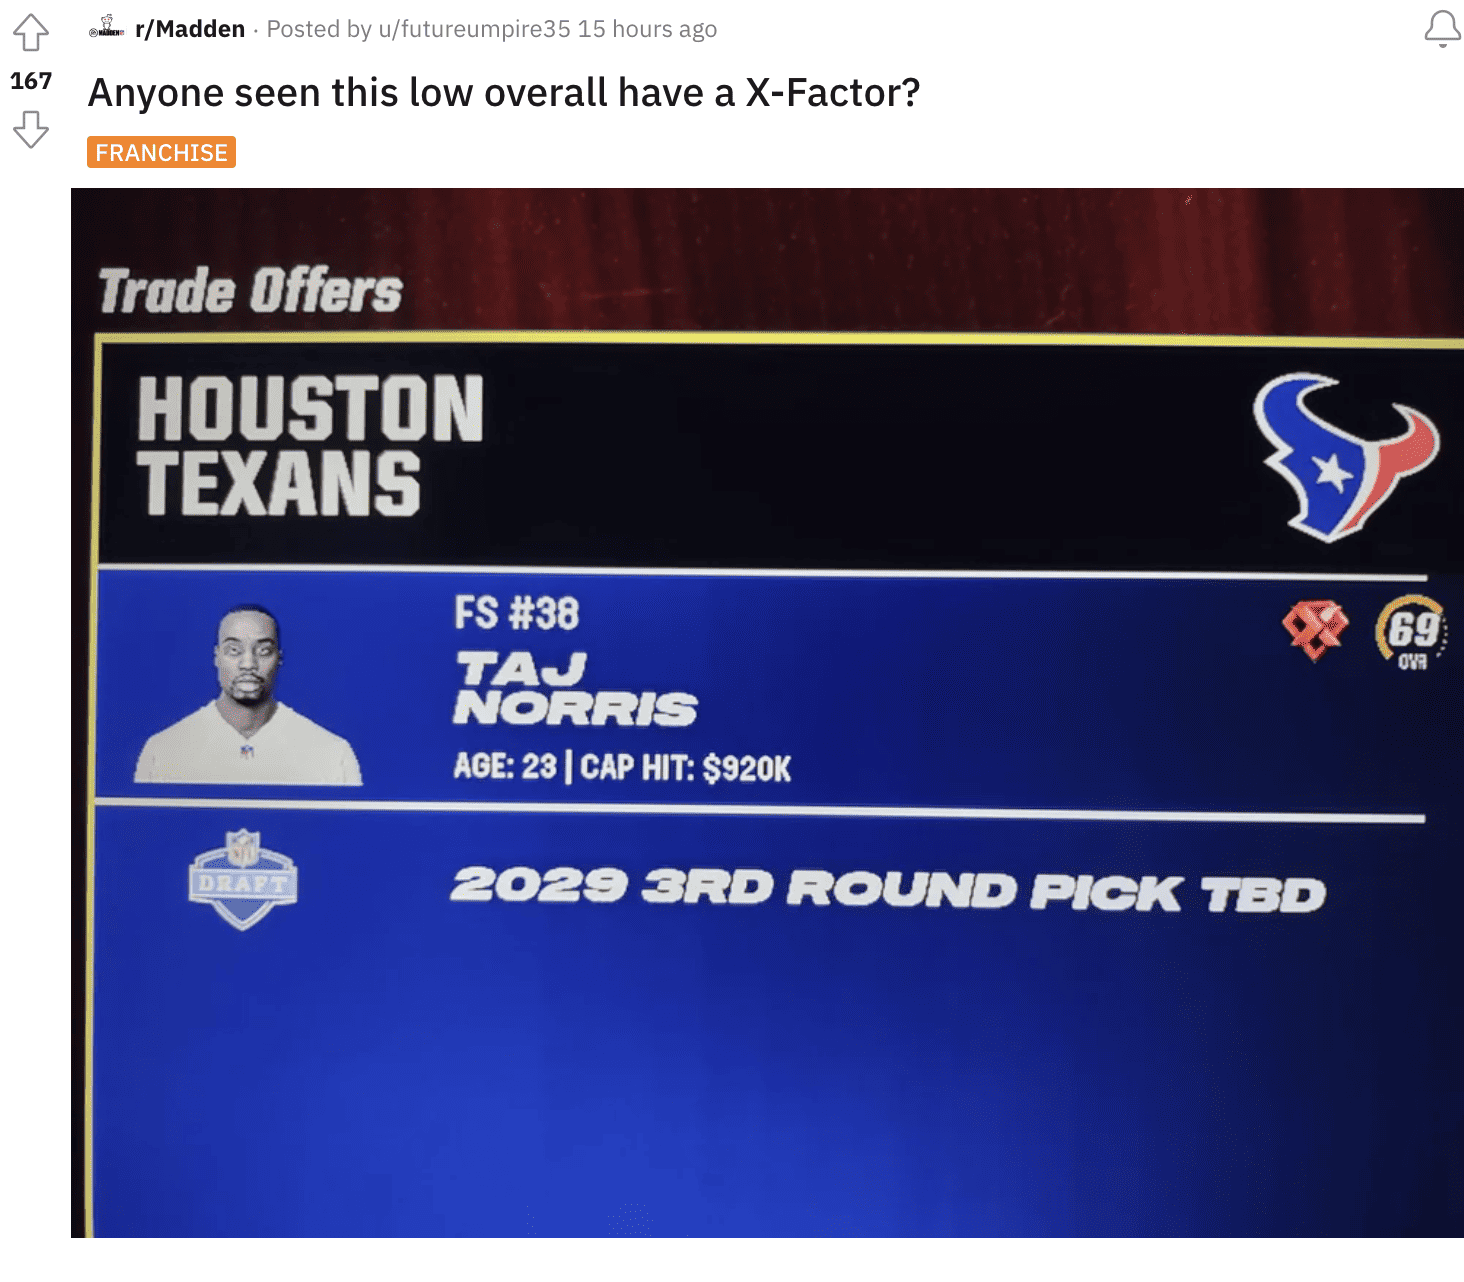 Get ready for the Houston Texans' 2020 season draft picks, where surprising low OVR superstars with X-Factor abilities in Madden 24 are set to captivate the community.